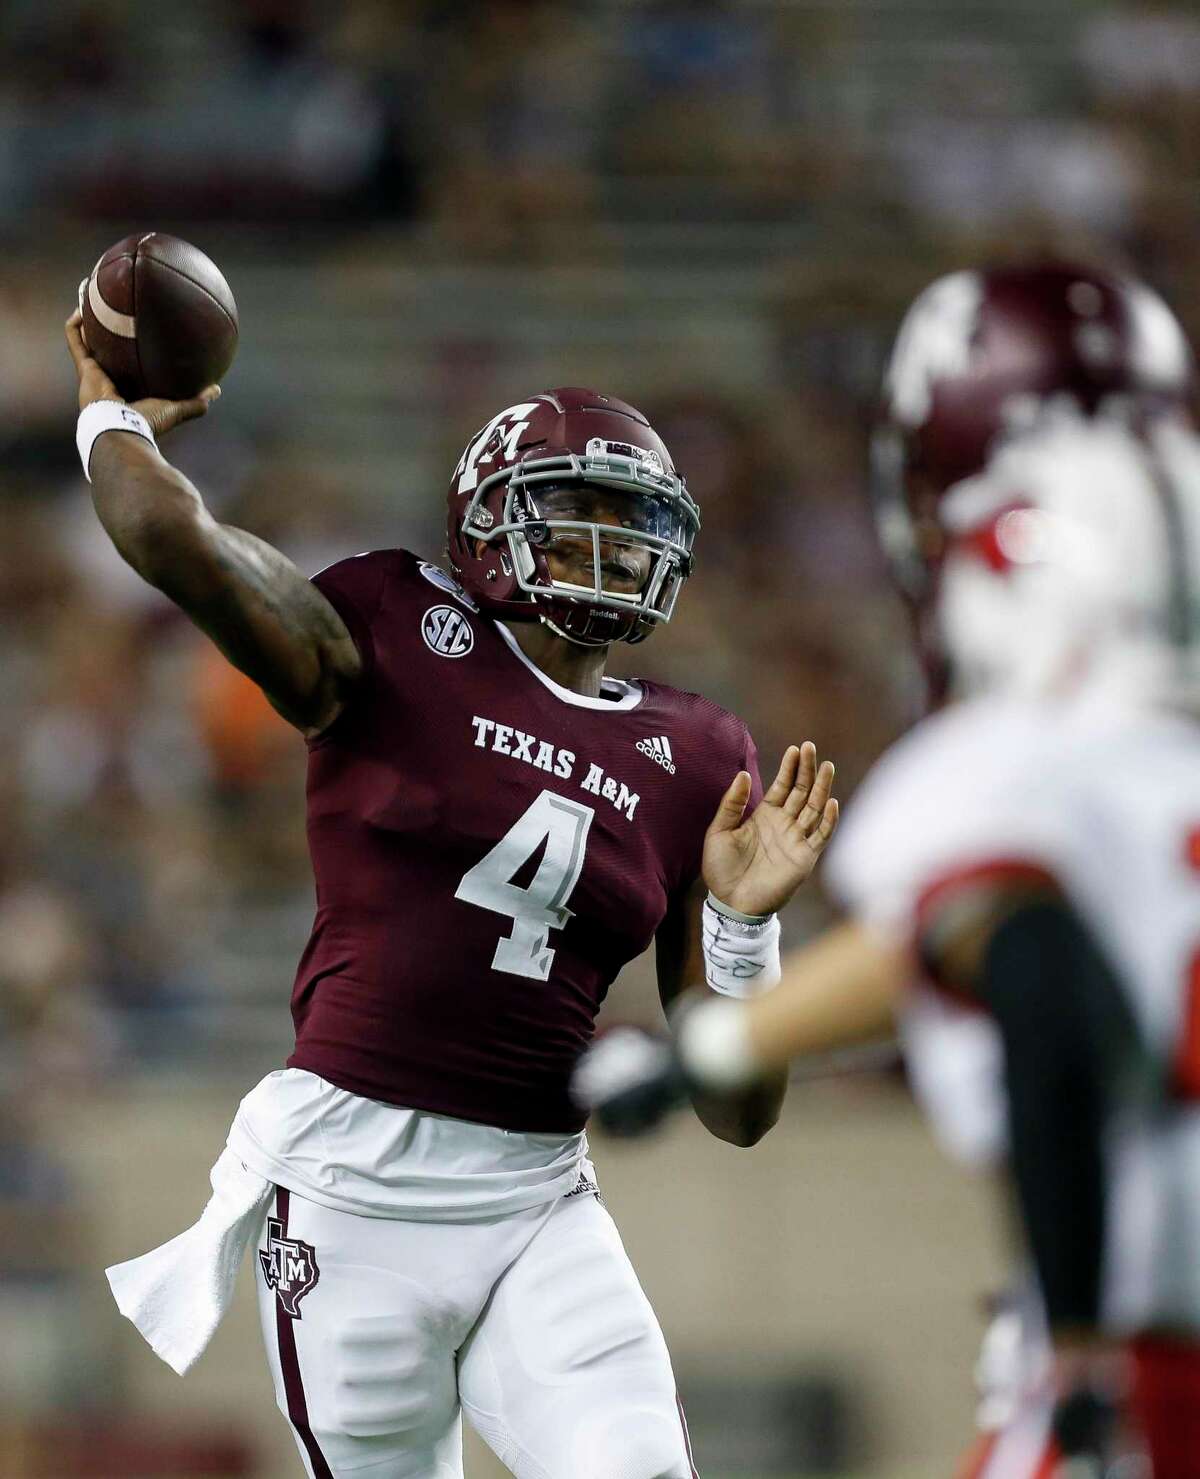 James Foster was a former four-star prospect from Alabama who slid down the depth chart during his time at Texas A&M.